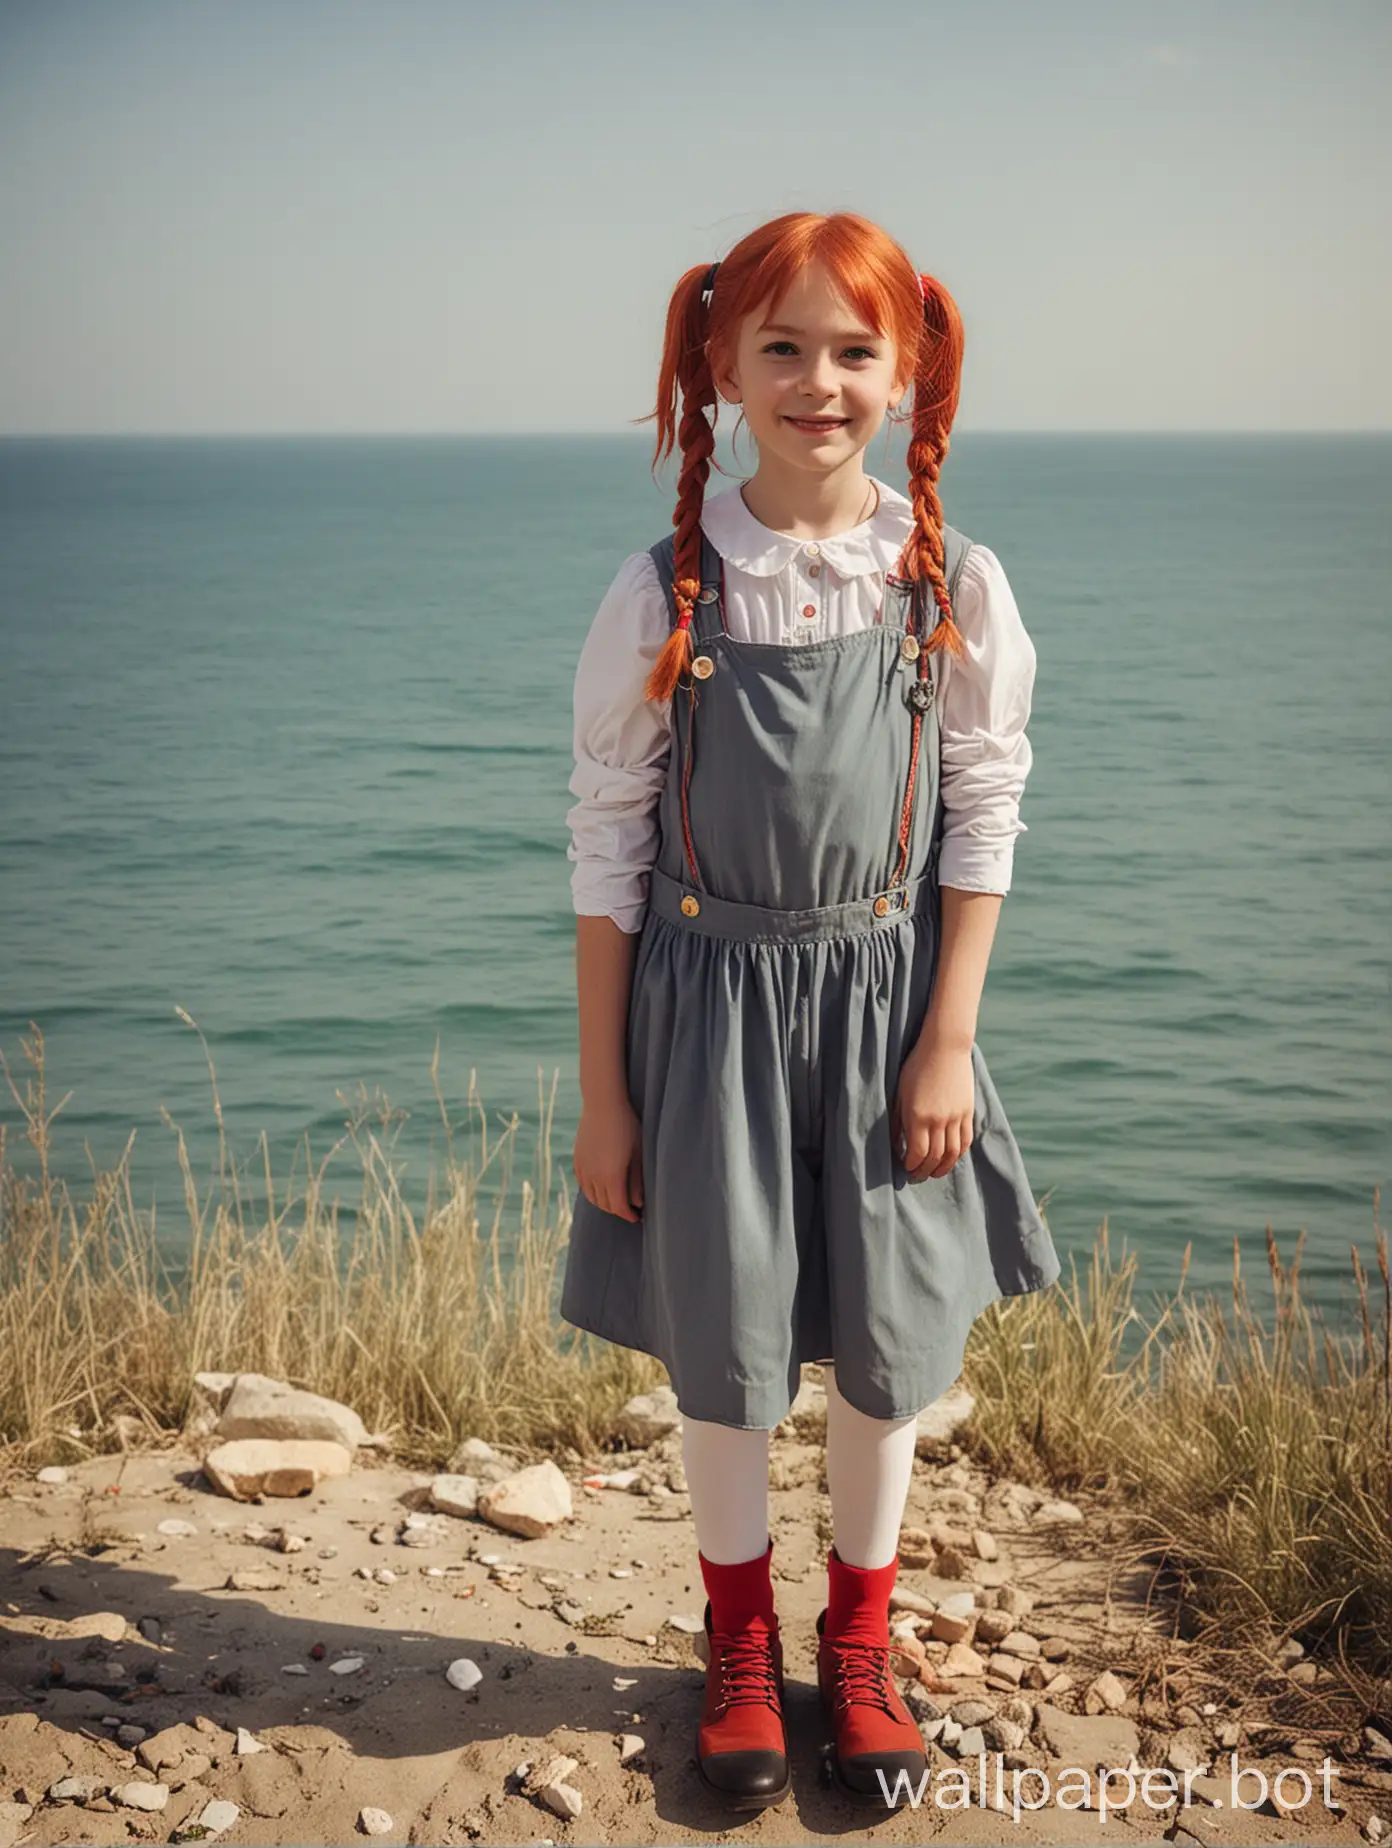 A 10-year-old girl dressed as Pippi Longstocking, full-length, cosplay, Crimea, view of the sea